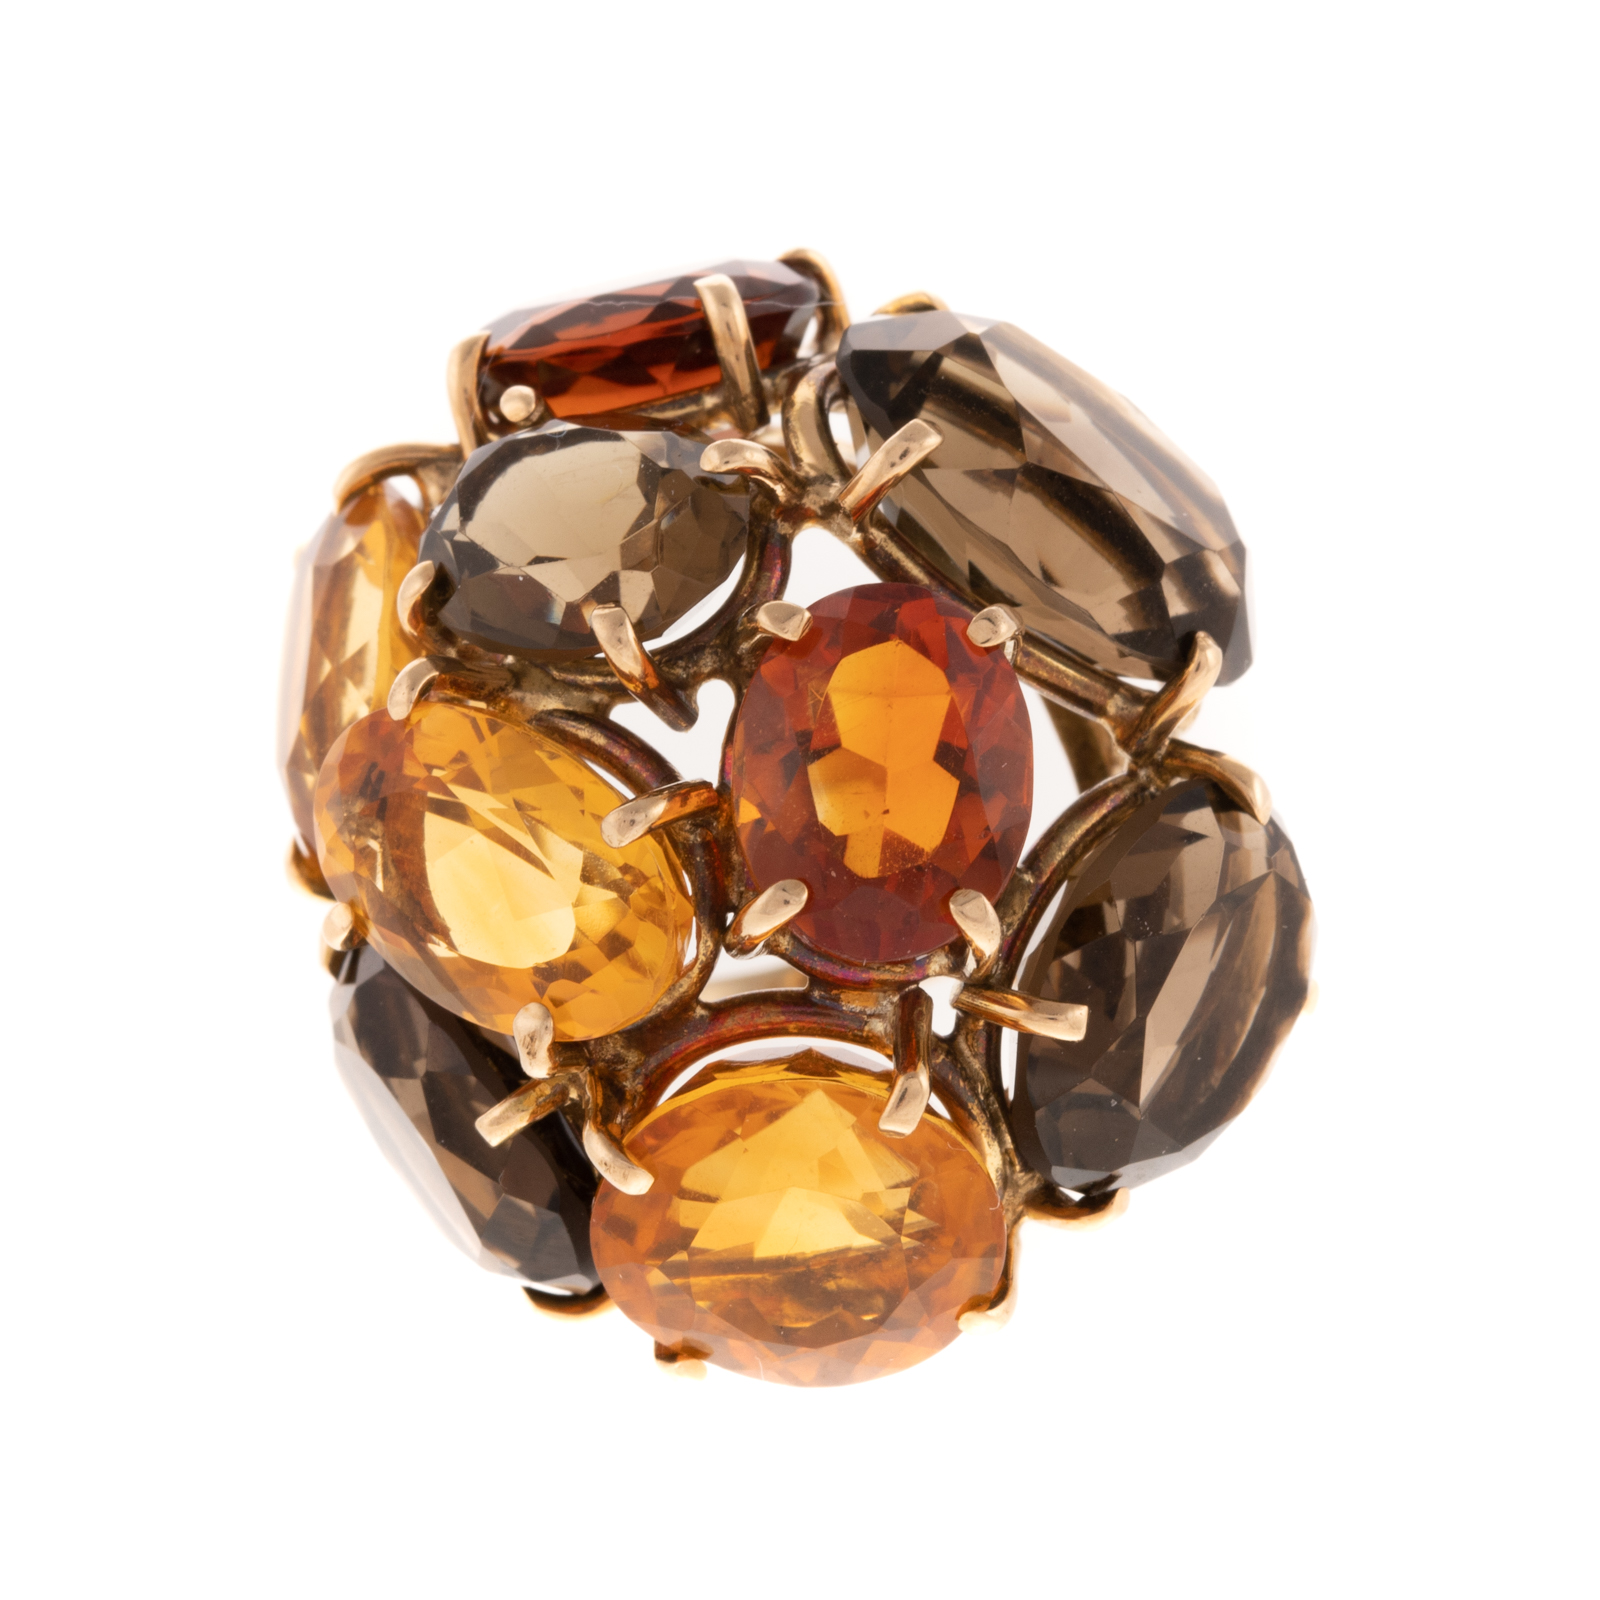 A BOLD CITRINE CLUSTER RING IN 33589b